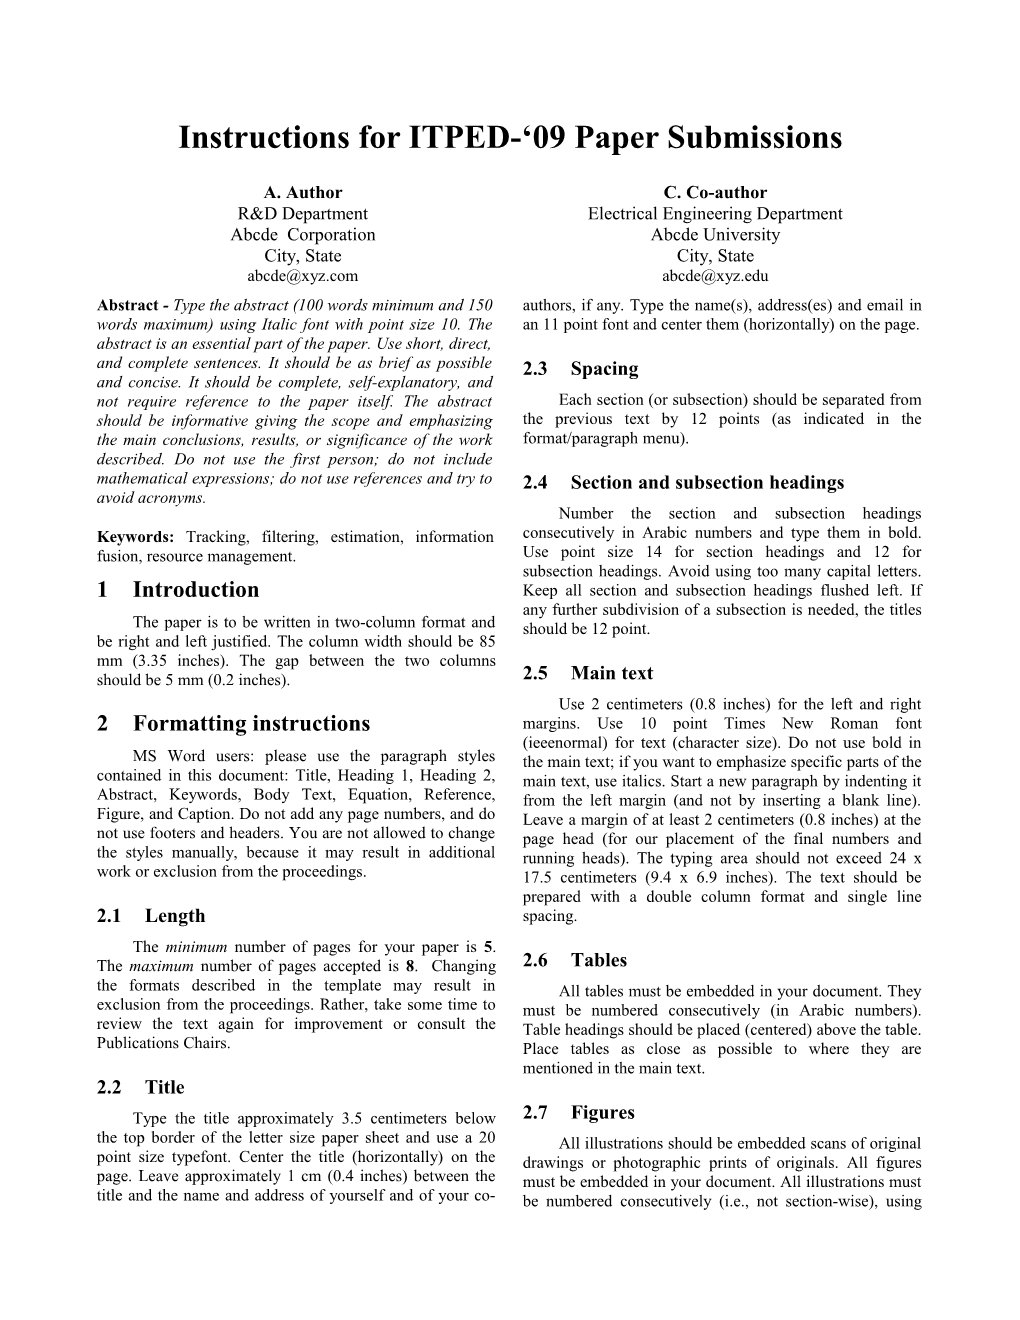 Typing Instructions for IEEE SMC'05 Paper Submissions